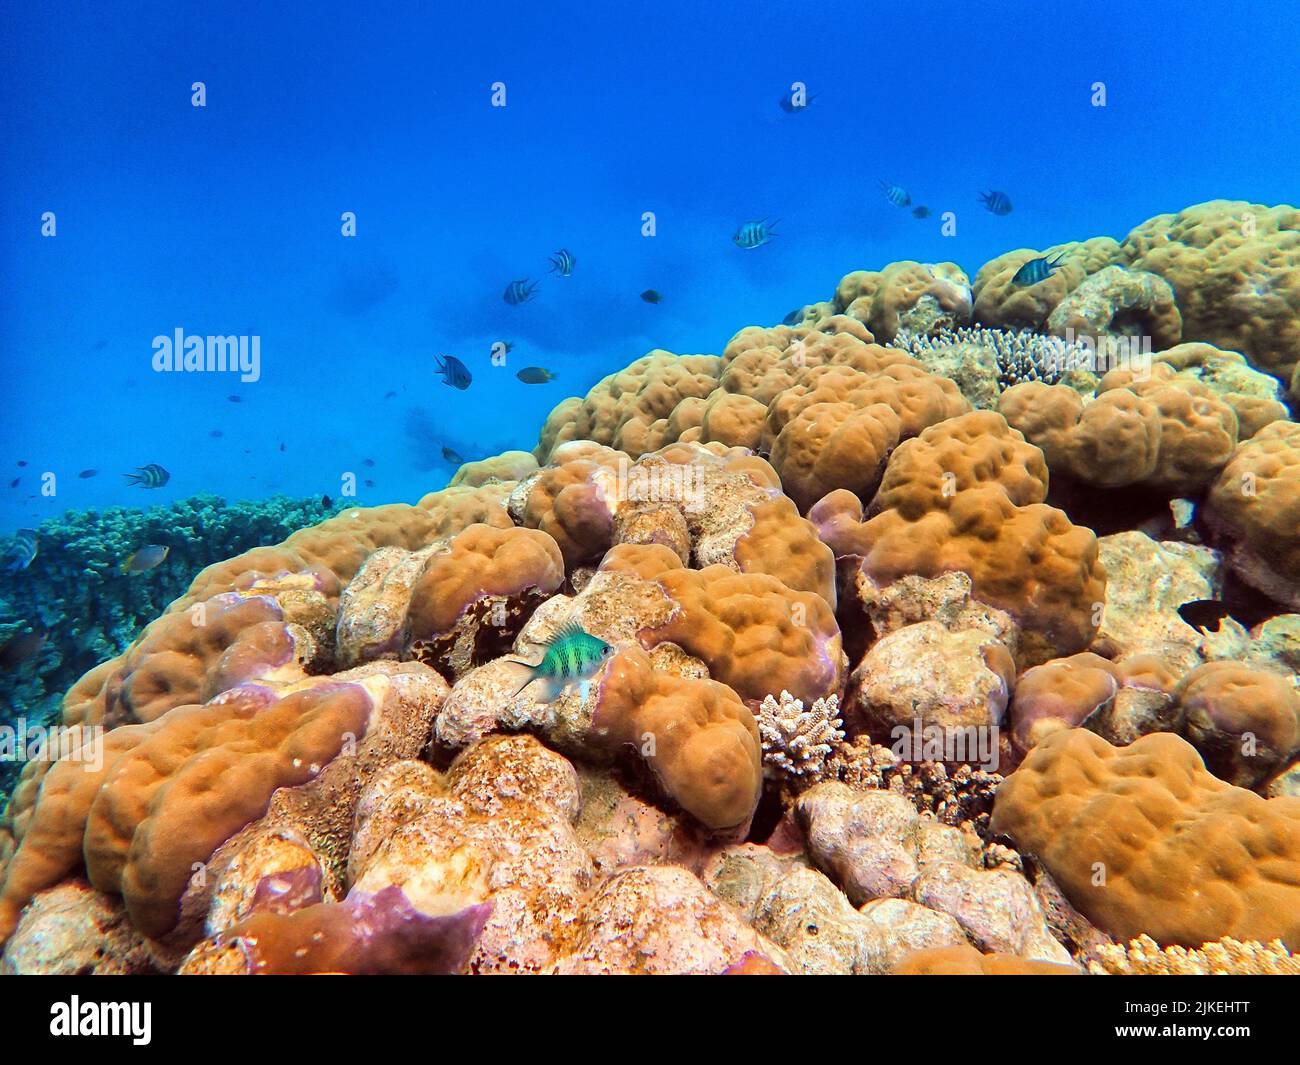 Indonesia Anambas Islands - Colorful coral reef with tropical fish ...